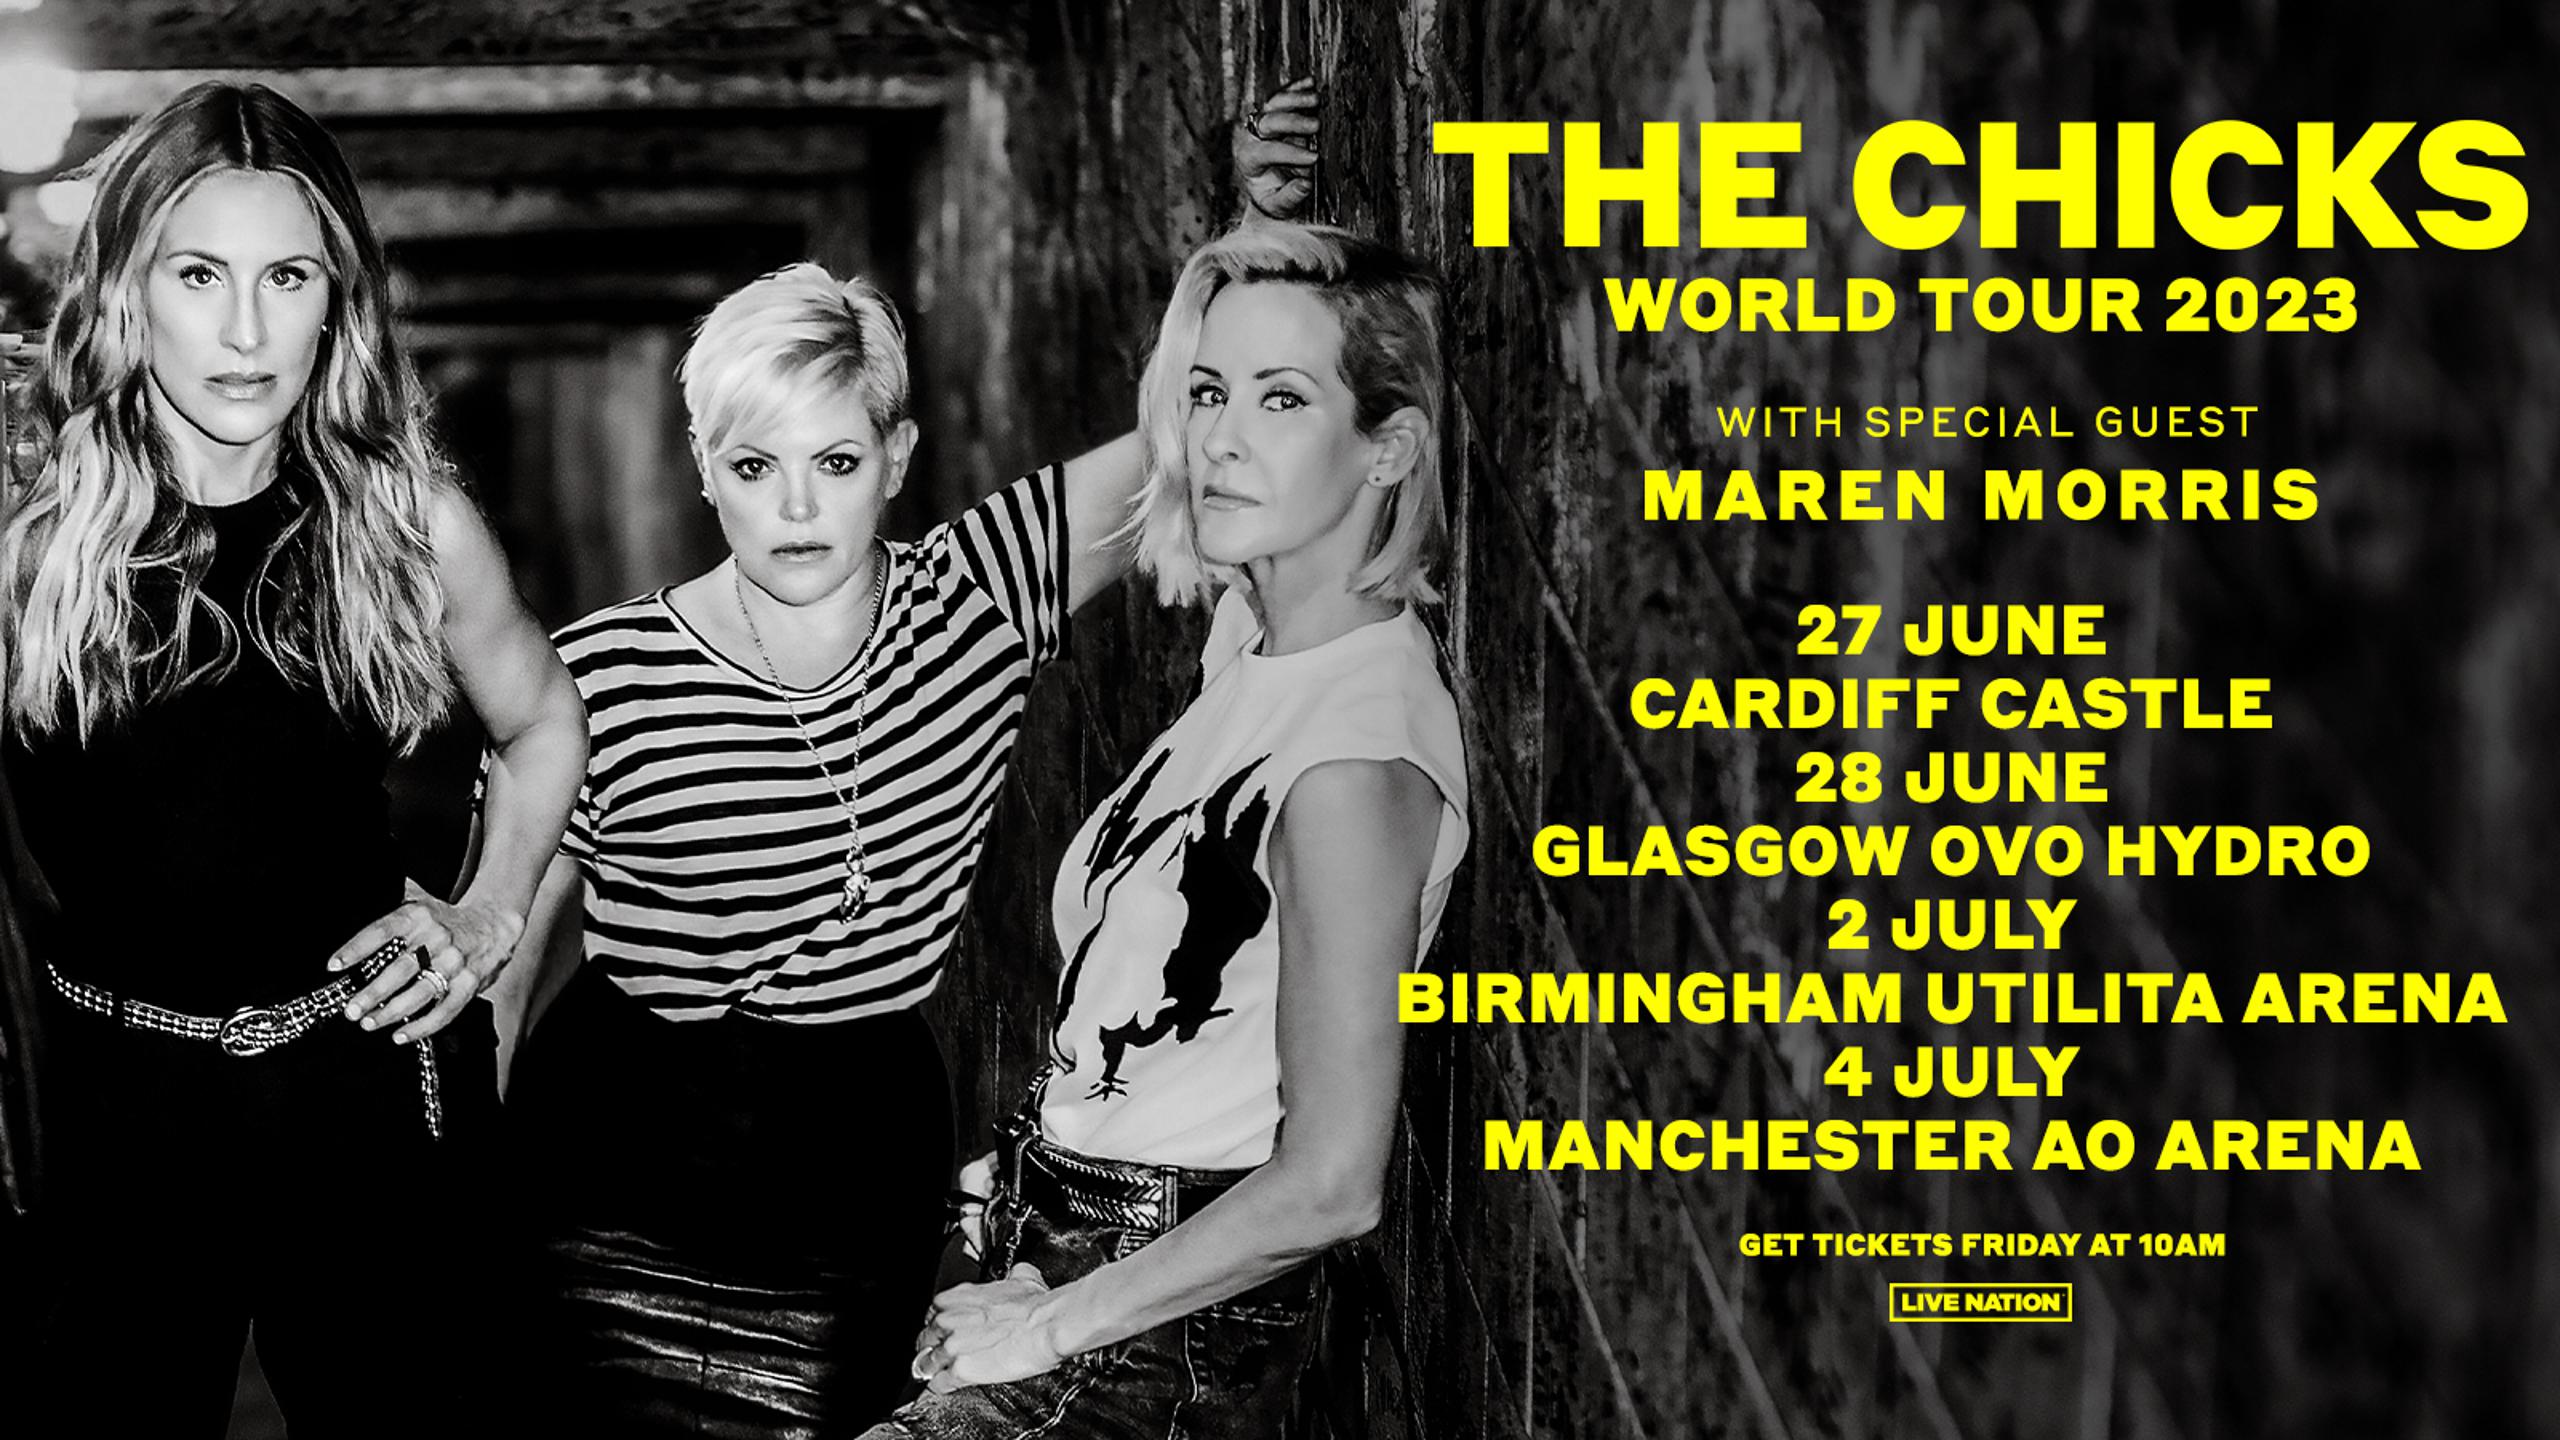 The Chicks concert tickets for Cardiff Castle, Cardiff Tuesday, 27 June